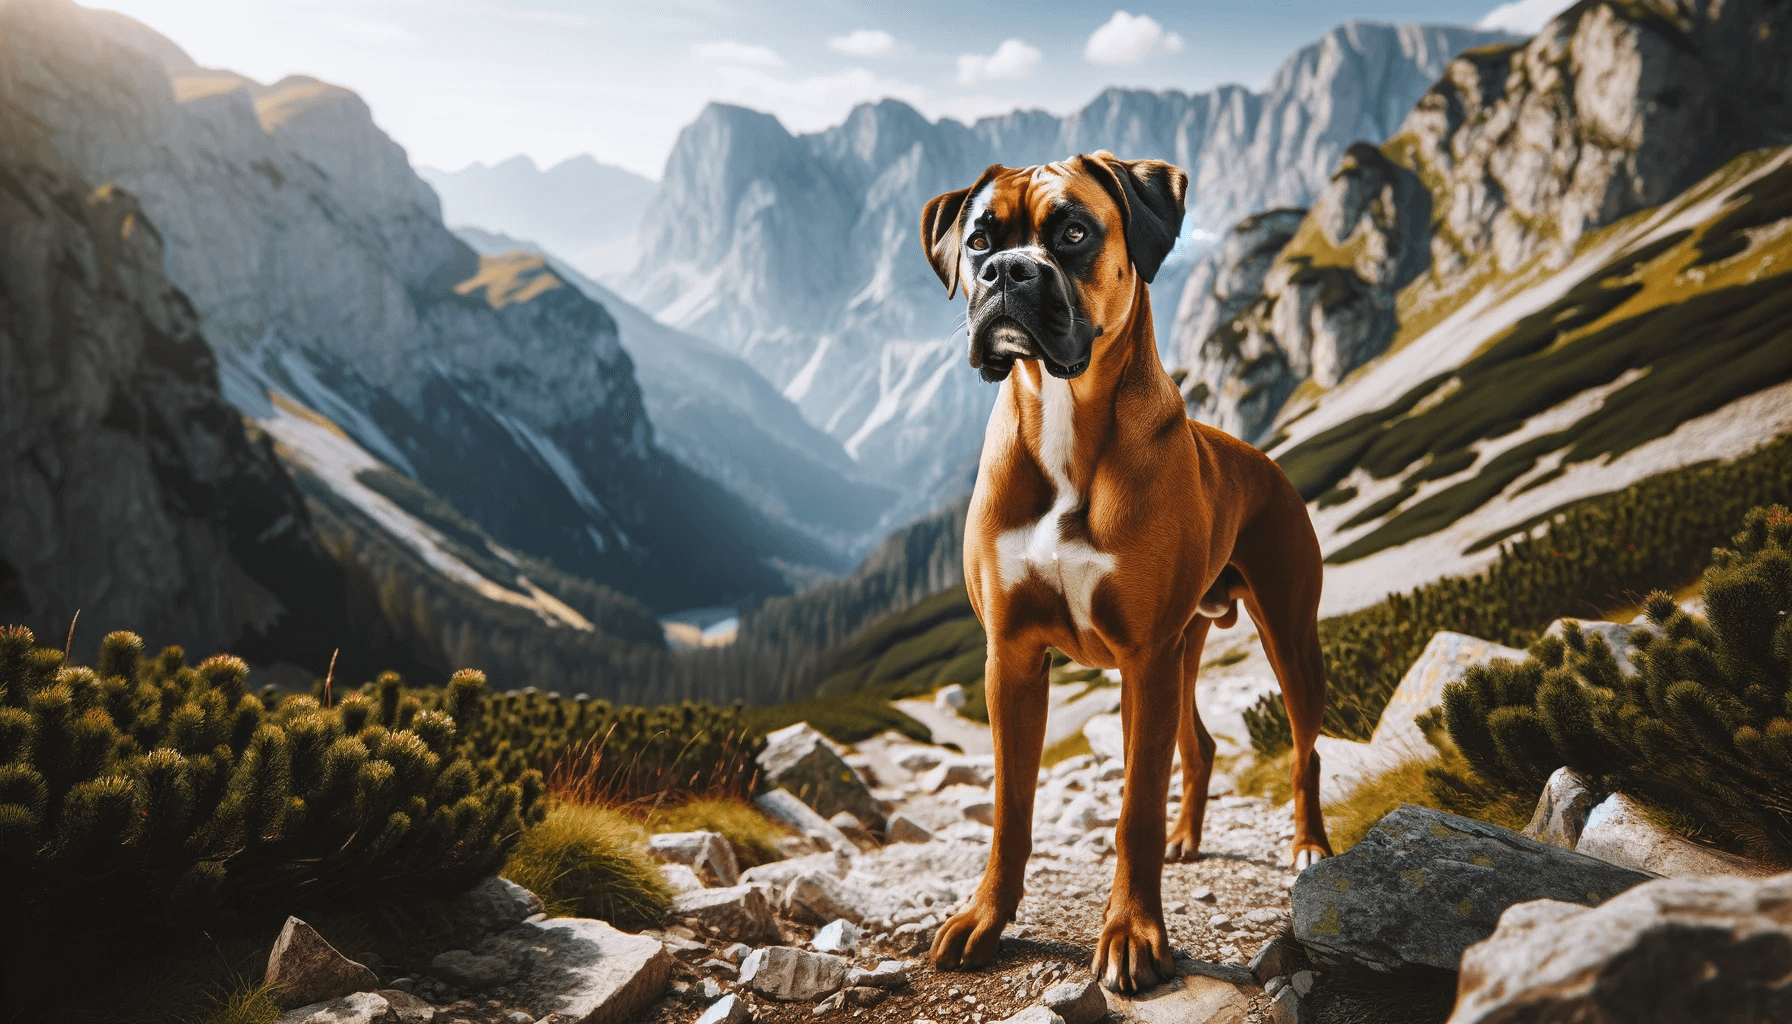 Adventurous Boxador (Boxer Lab Mix) standing on a rocky mountain trail with a scenic view in the background during a hiking adventure